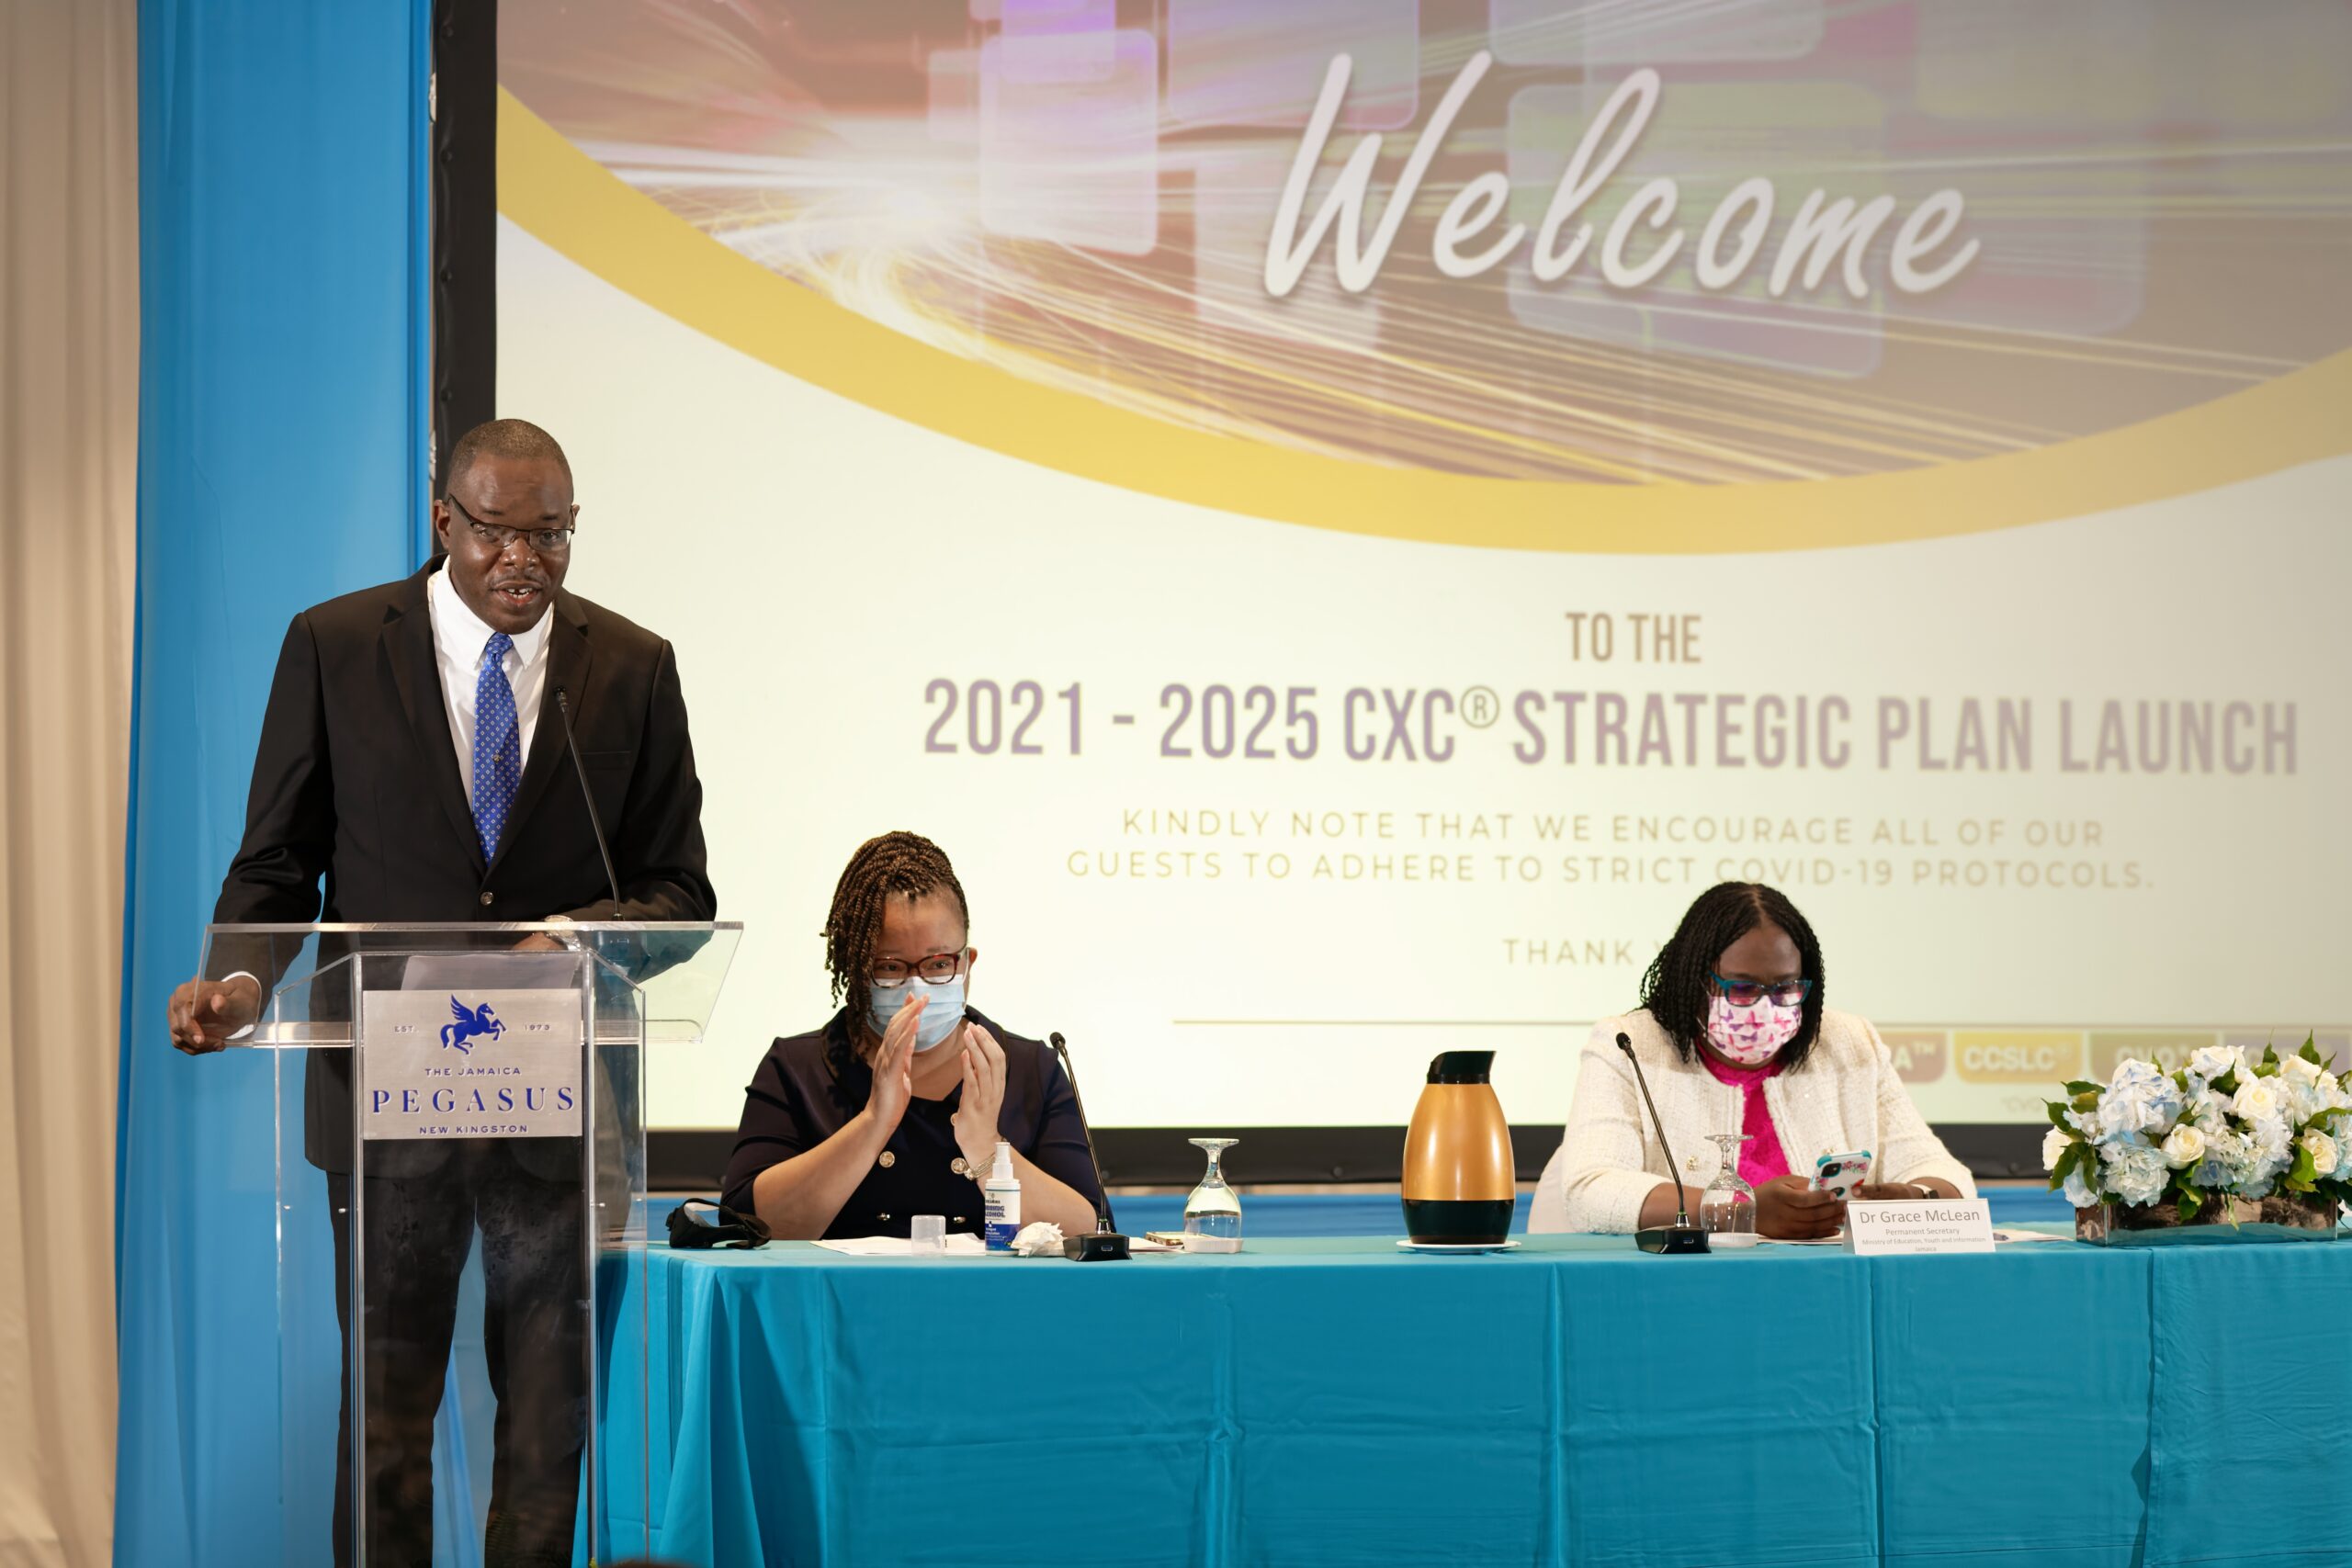 Dr Wayne Wesley, Registrar and CEO of CXC® addressing the audience, beside Master of Ceremonies. Ms Jodine Williams, Senior Manager - Syllabus & Curriculum Development Unit, CXC